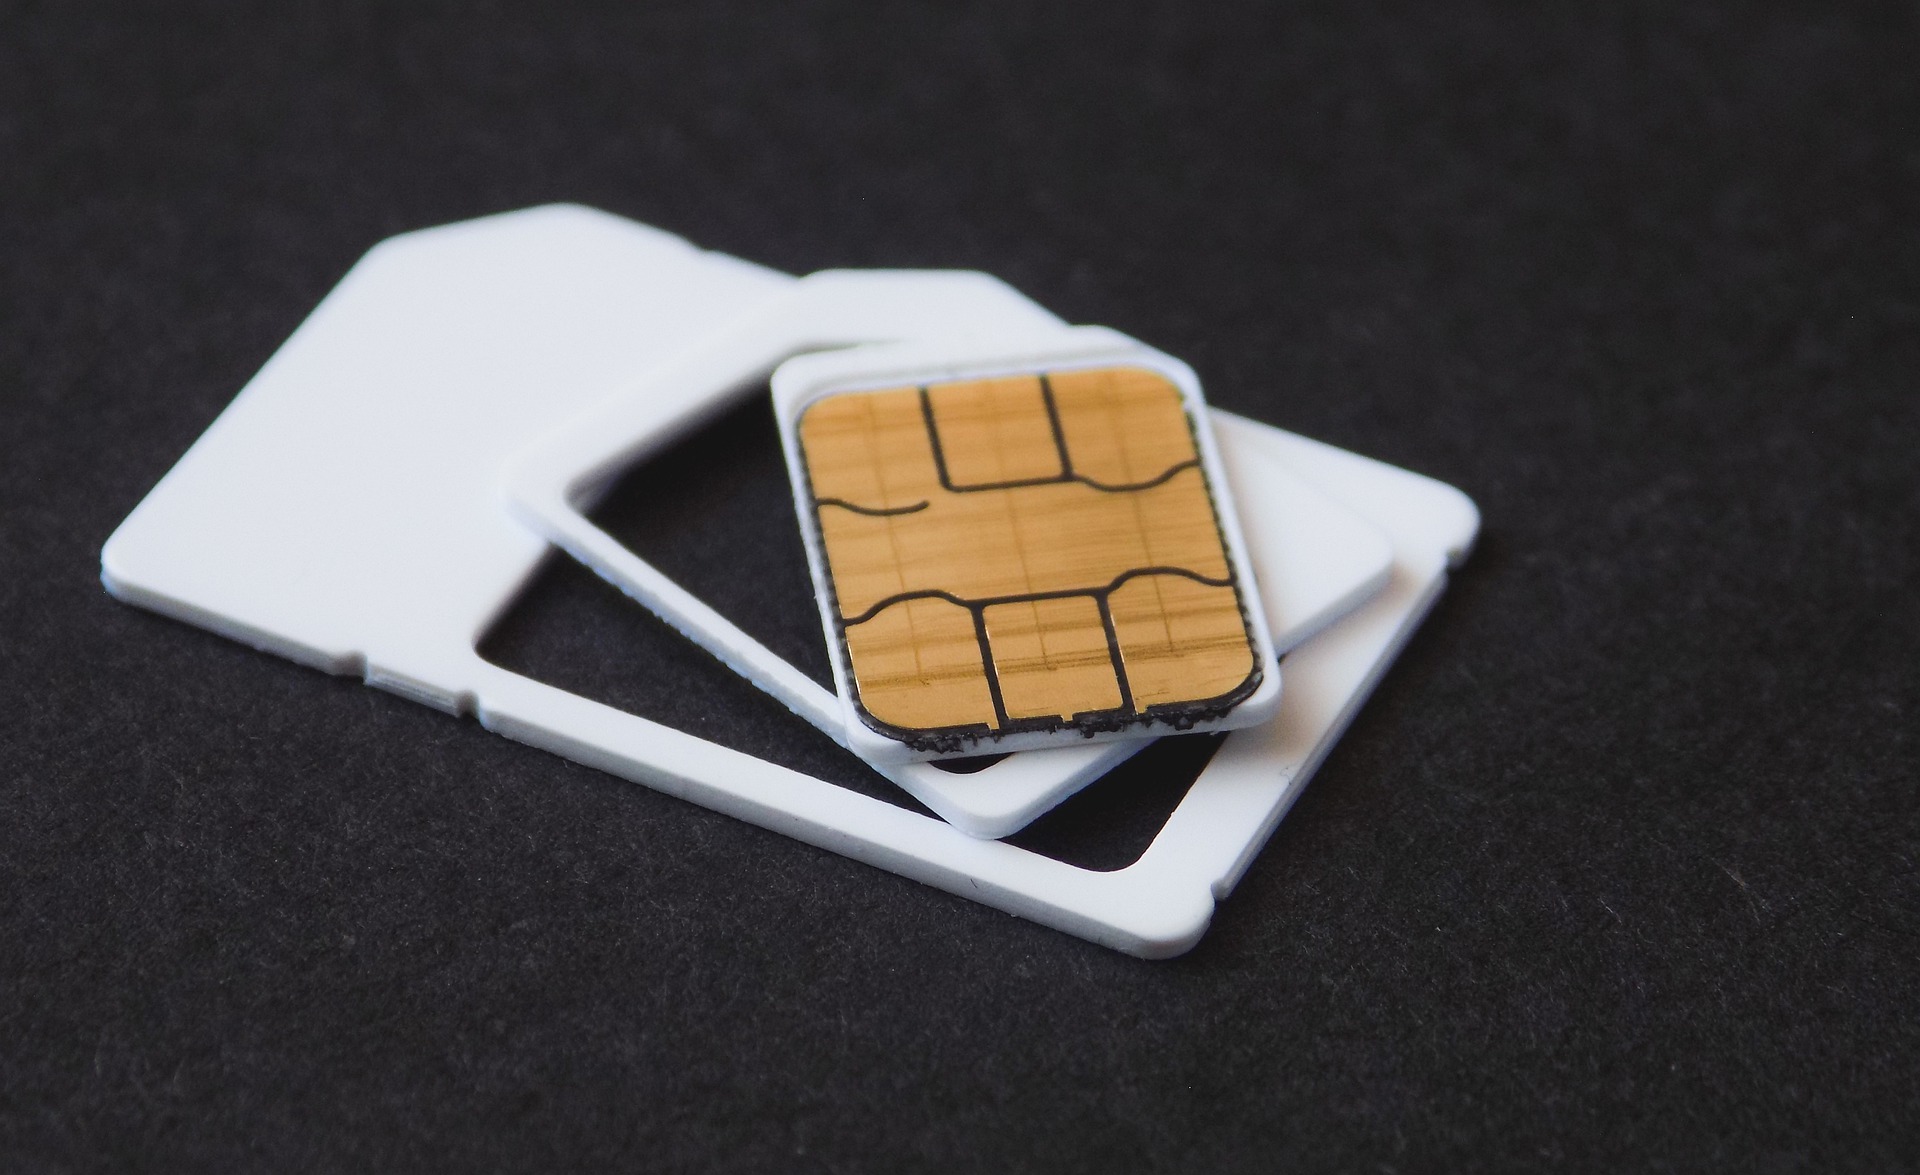 How to unlock the SIM card on your iPhone iMore